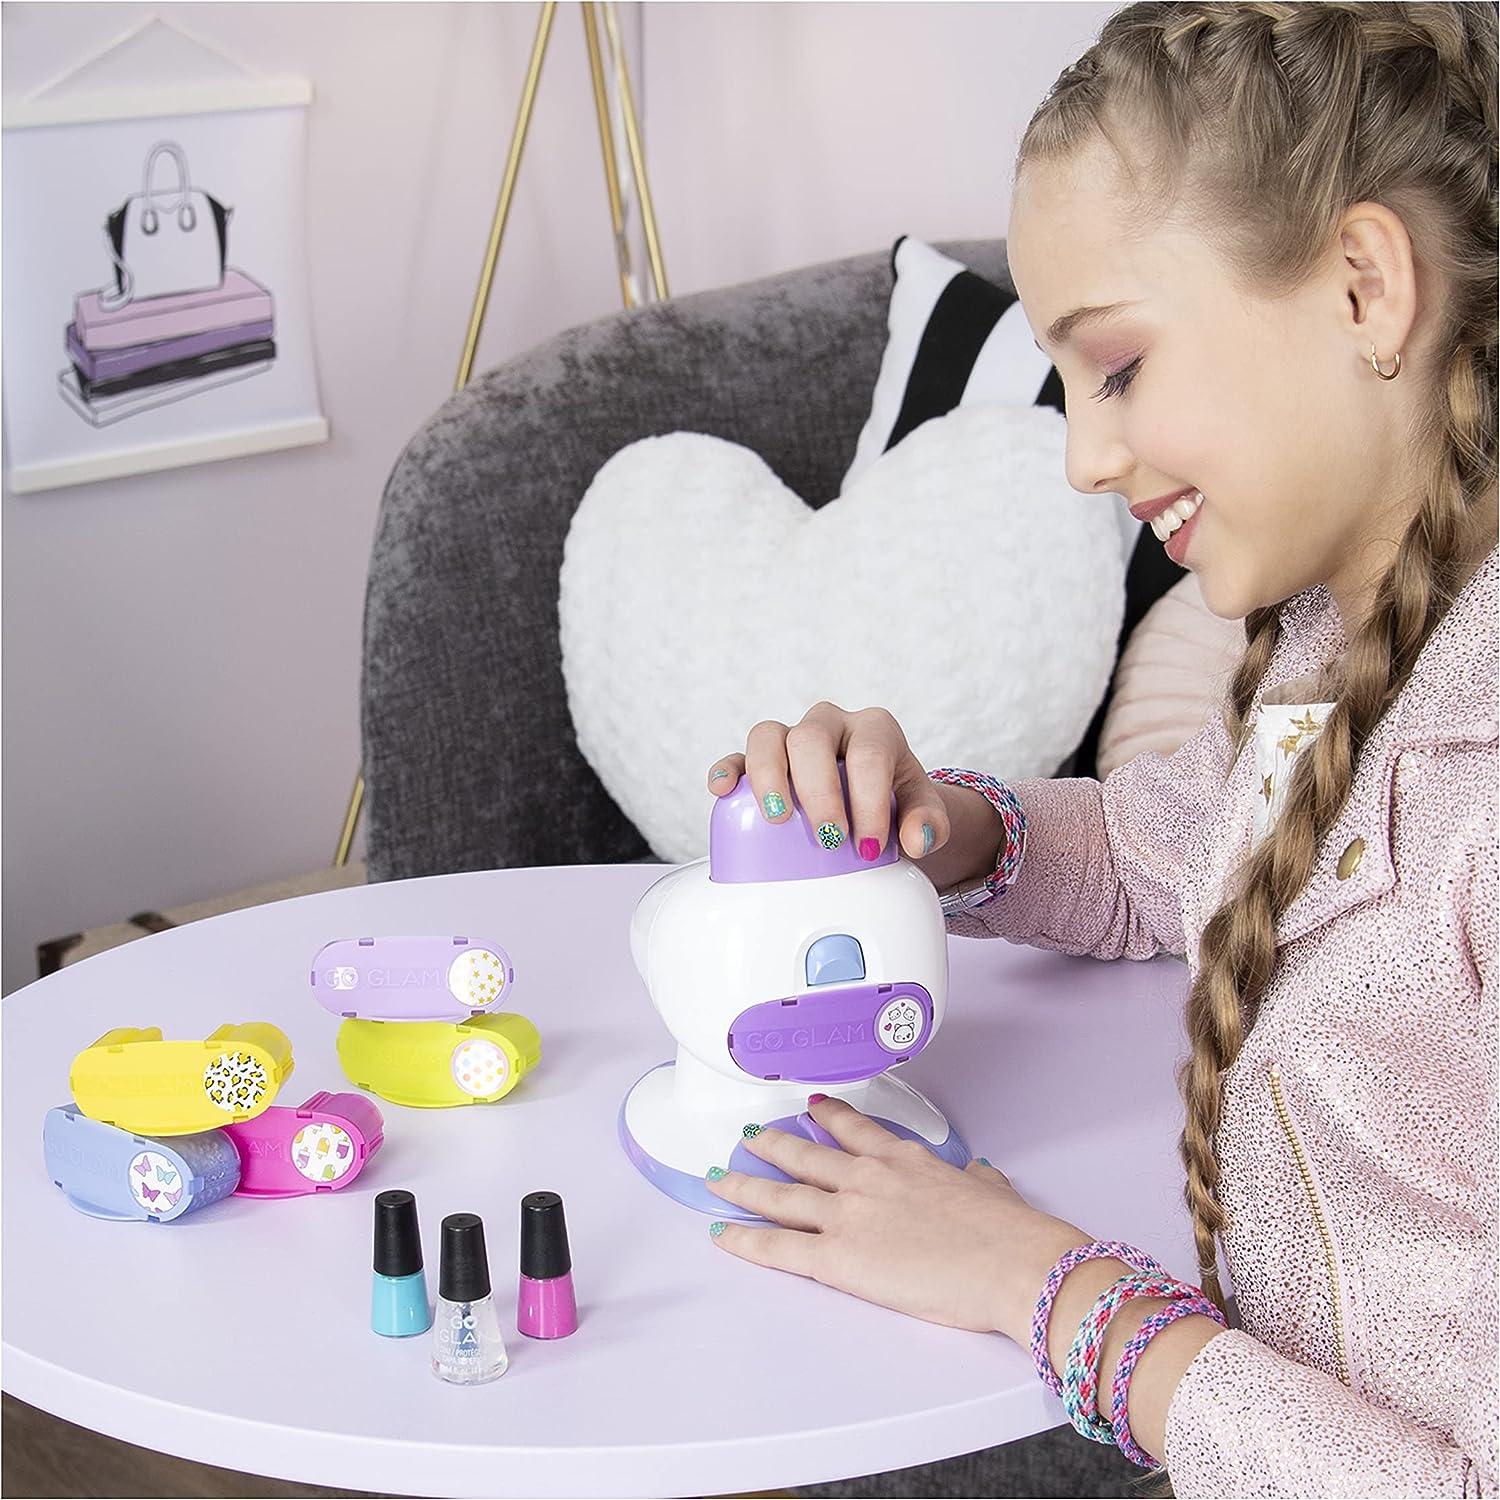 Cool Maker, GO Glam Nail Stamper Deluxe Salon with Dryer for Manicures and  Pedicures with 3 Bonus Patterns and 2 Bonus Nail Polishes,  Exclusive Go  Glam Nail Stamper Salon (Bonus)